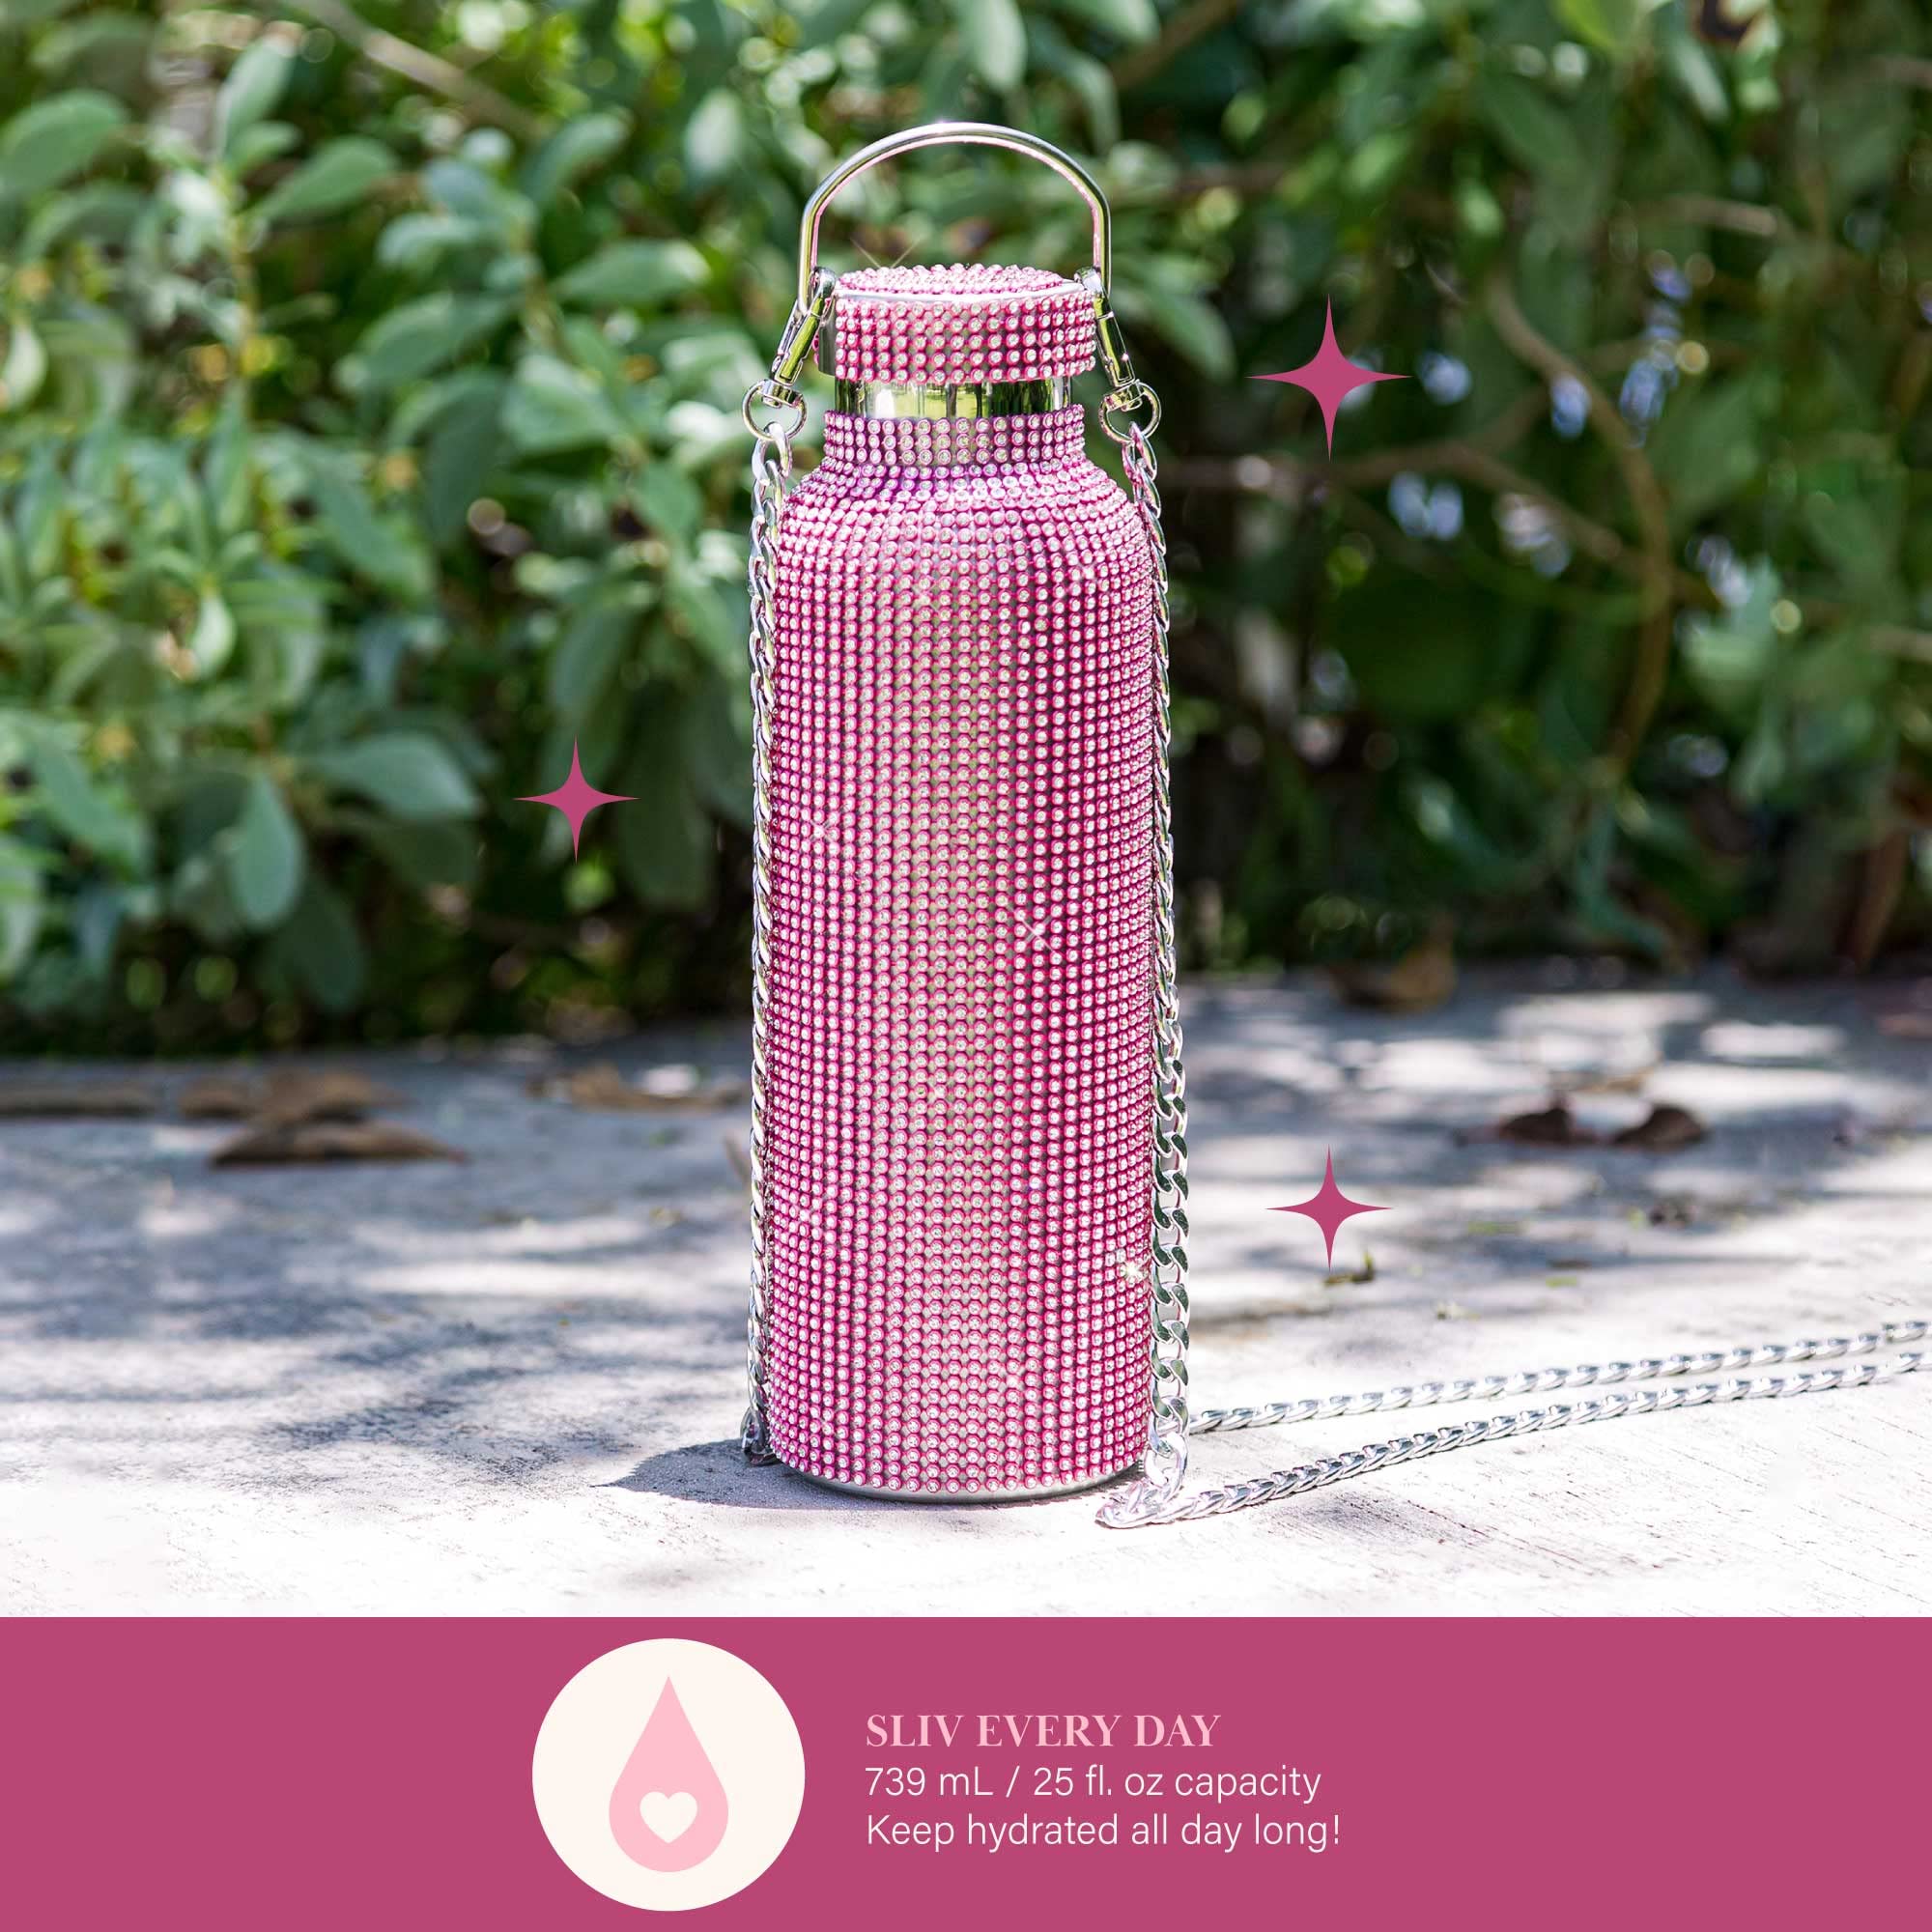 Paris Hilton Diamond Bling Water Bottle With Lid And Removable Carrying Strap, Stainless Steel Vacuum Insulated, Bedazzled With Over 5000 Rhinestones, 25-Ounce, Ombre Pink to Silver